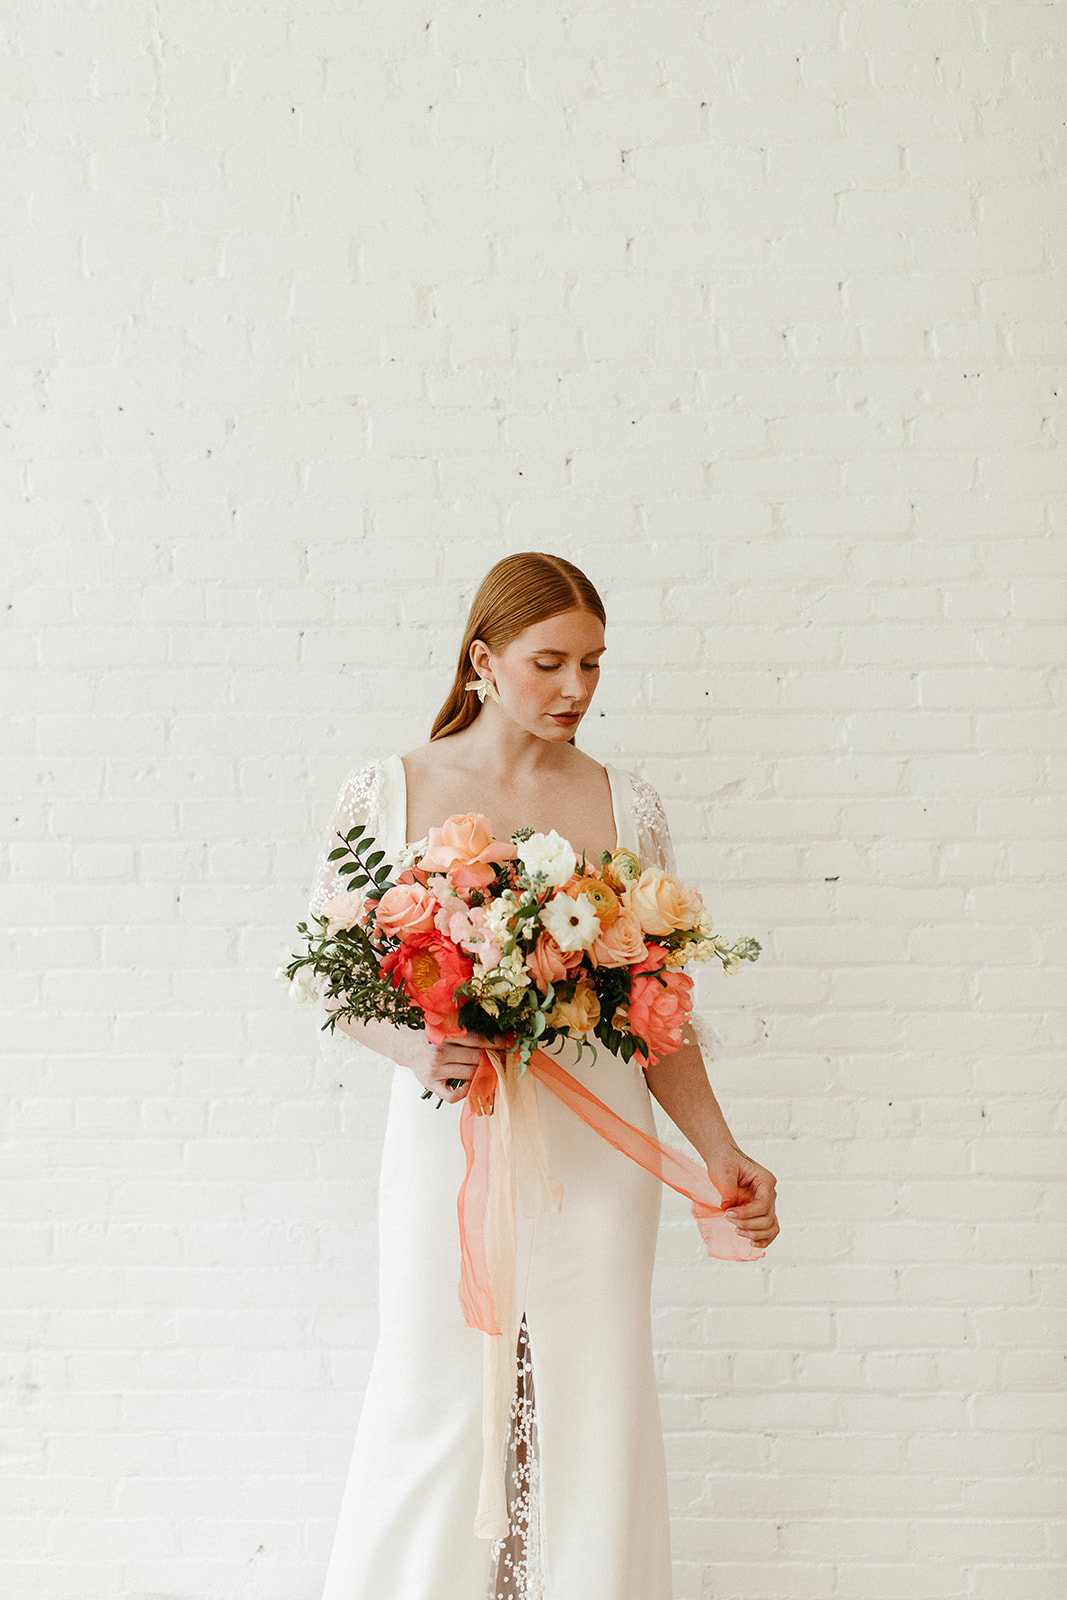 Sleek bridal style in a Delica Bride gown with citrus florals